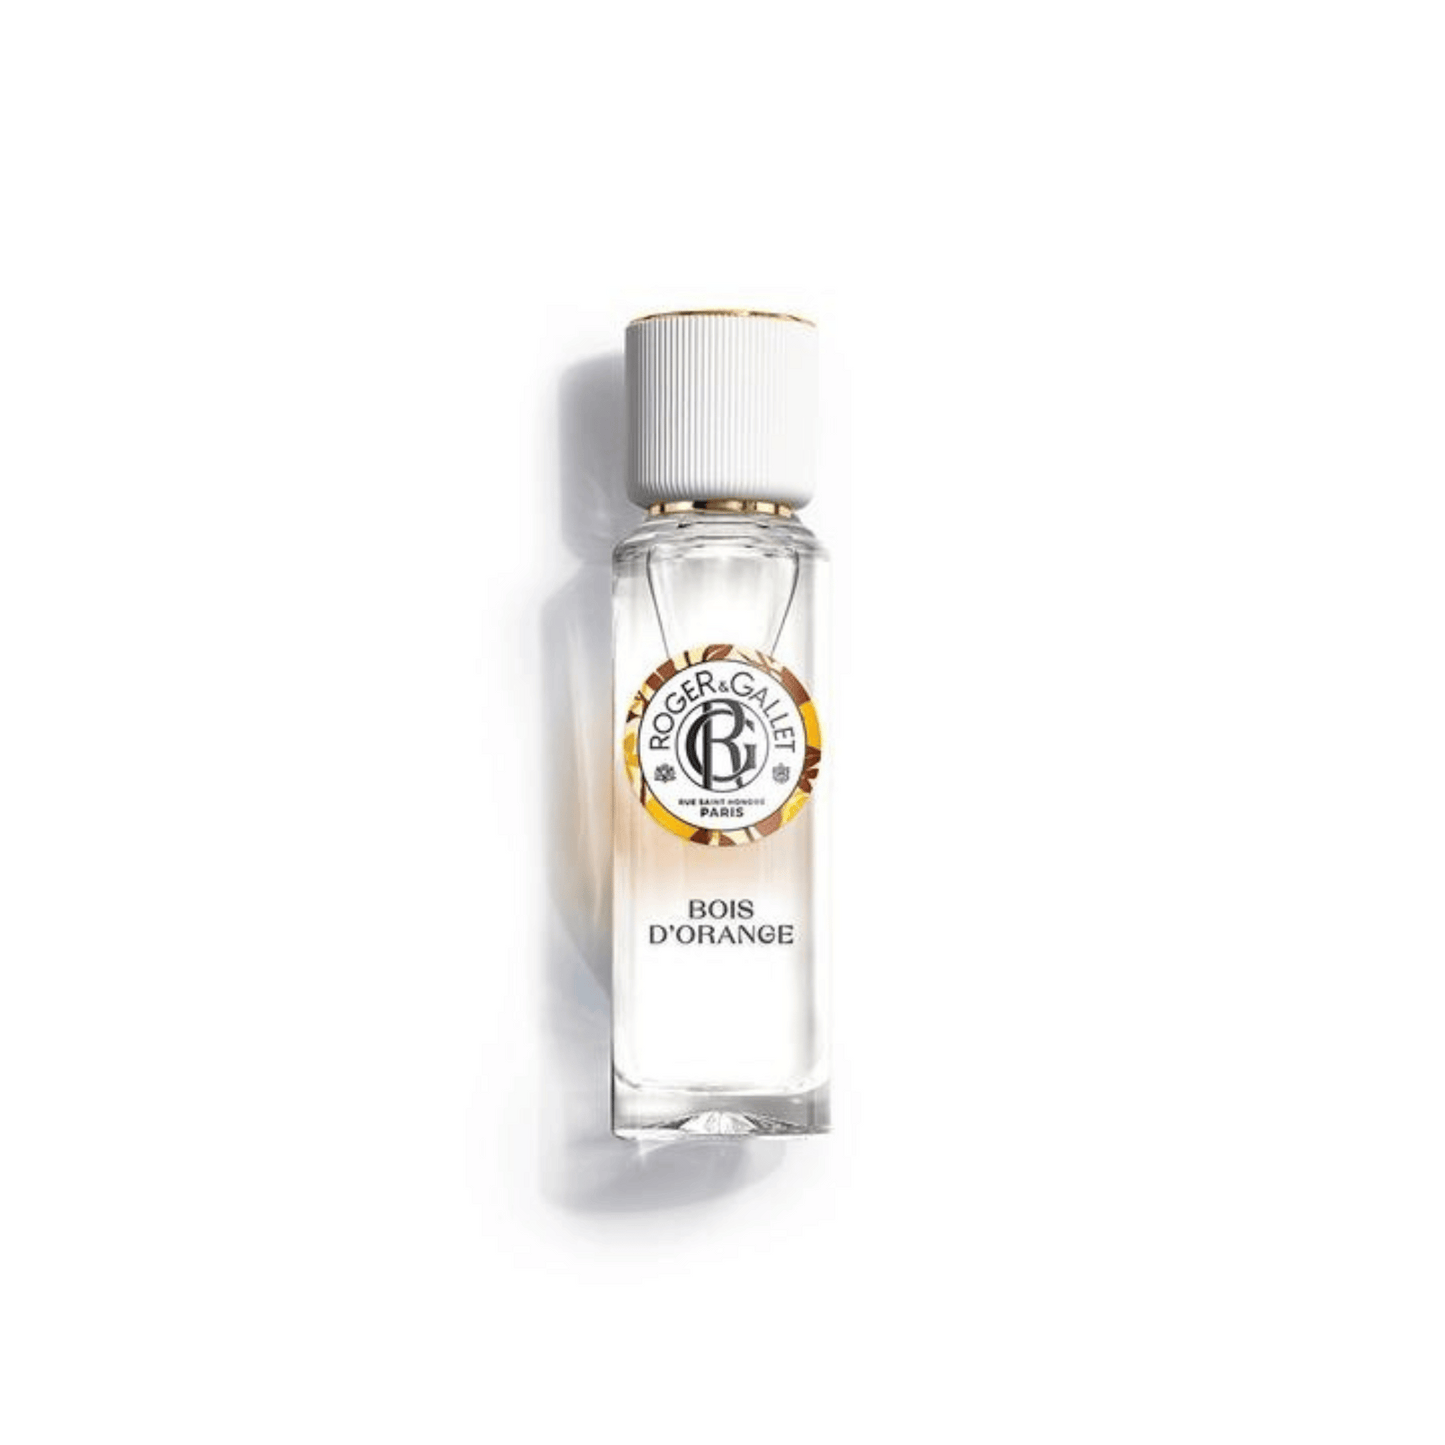 Primary Image of Bois D'Orange Wellbeing Water Fragrance Spray 